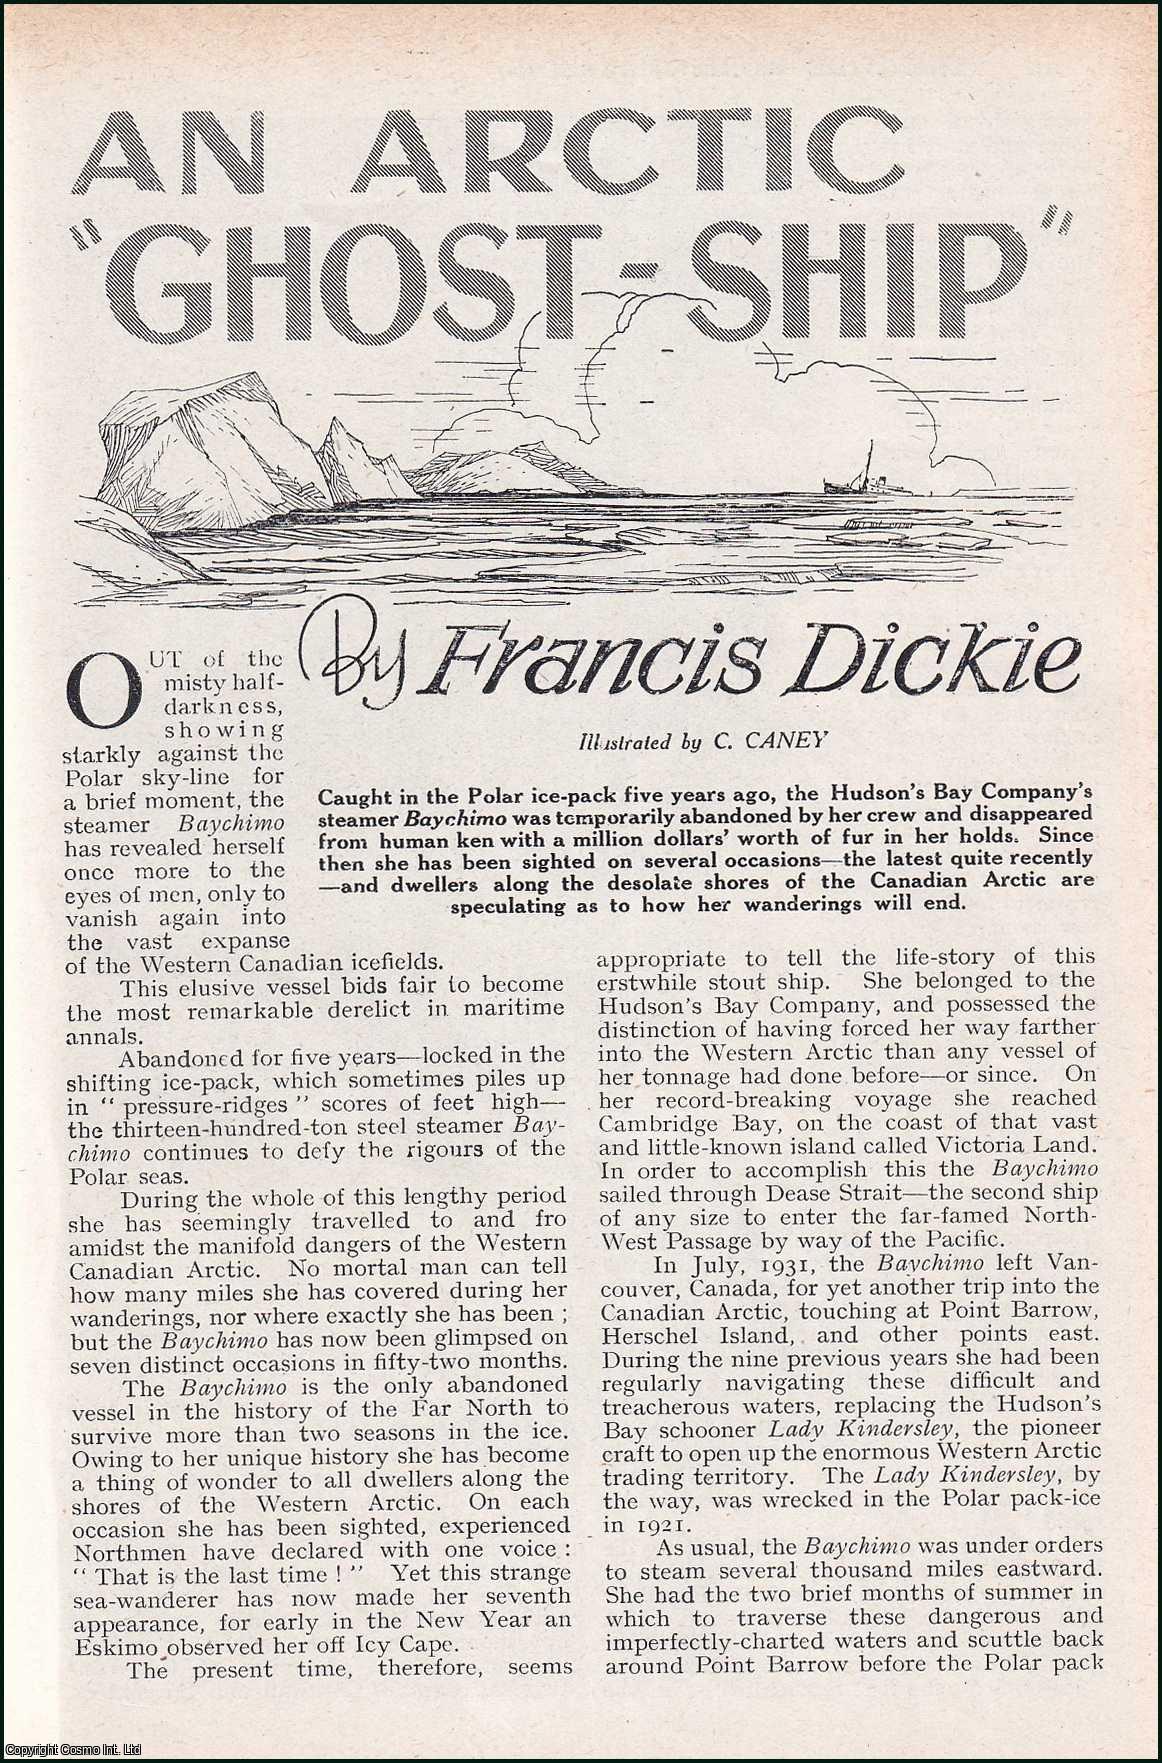 Francis Dickie. Illustrated by C. Caney. - An Arctic Ghost-Ship. The Hudson's Bay Company's steamer, Baychimo. An uncommon original article from the Wide World Magazine, 1938.